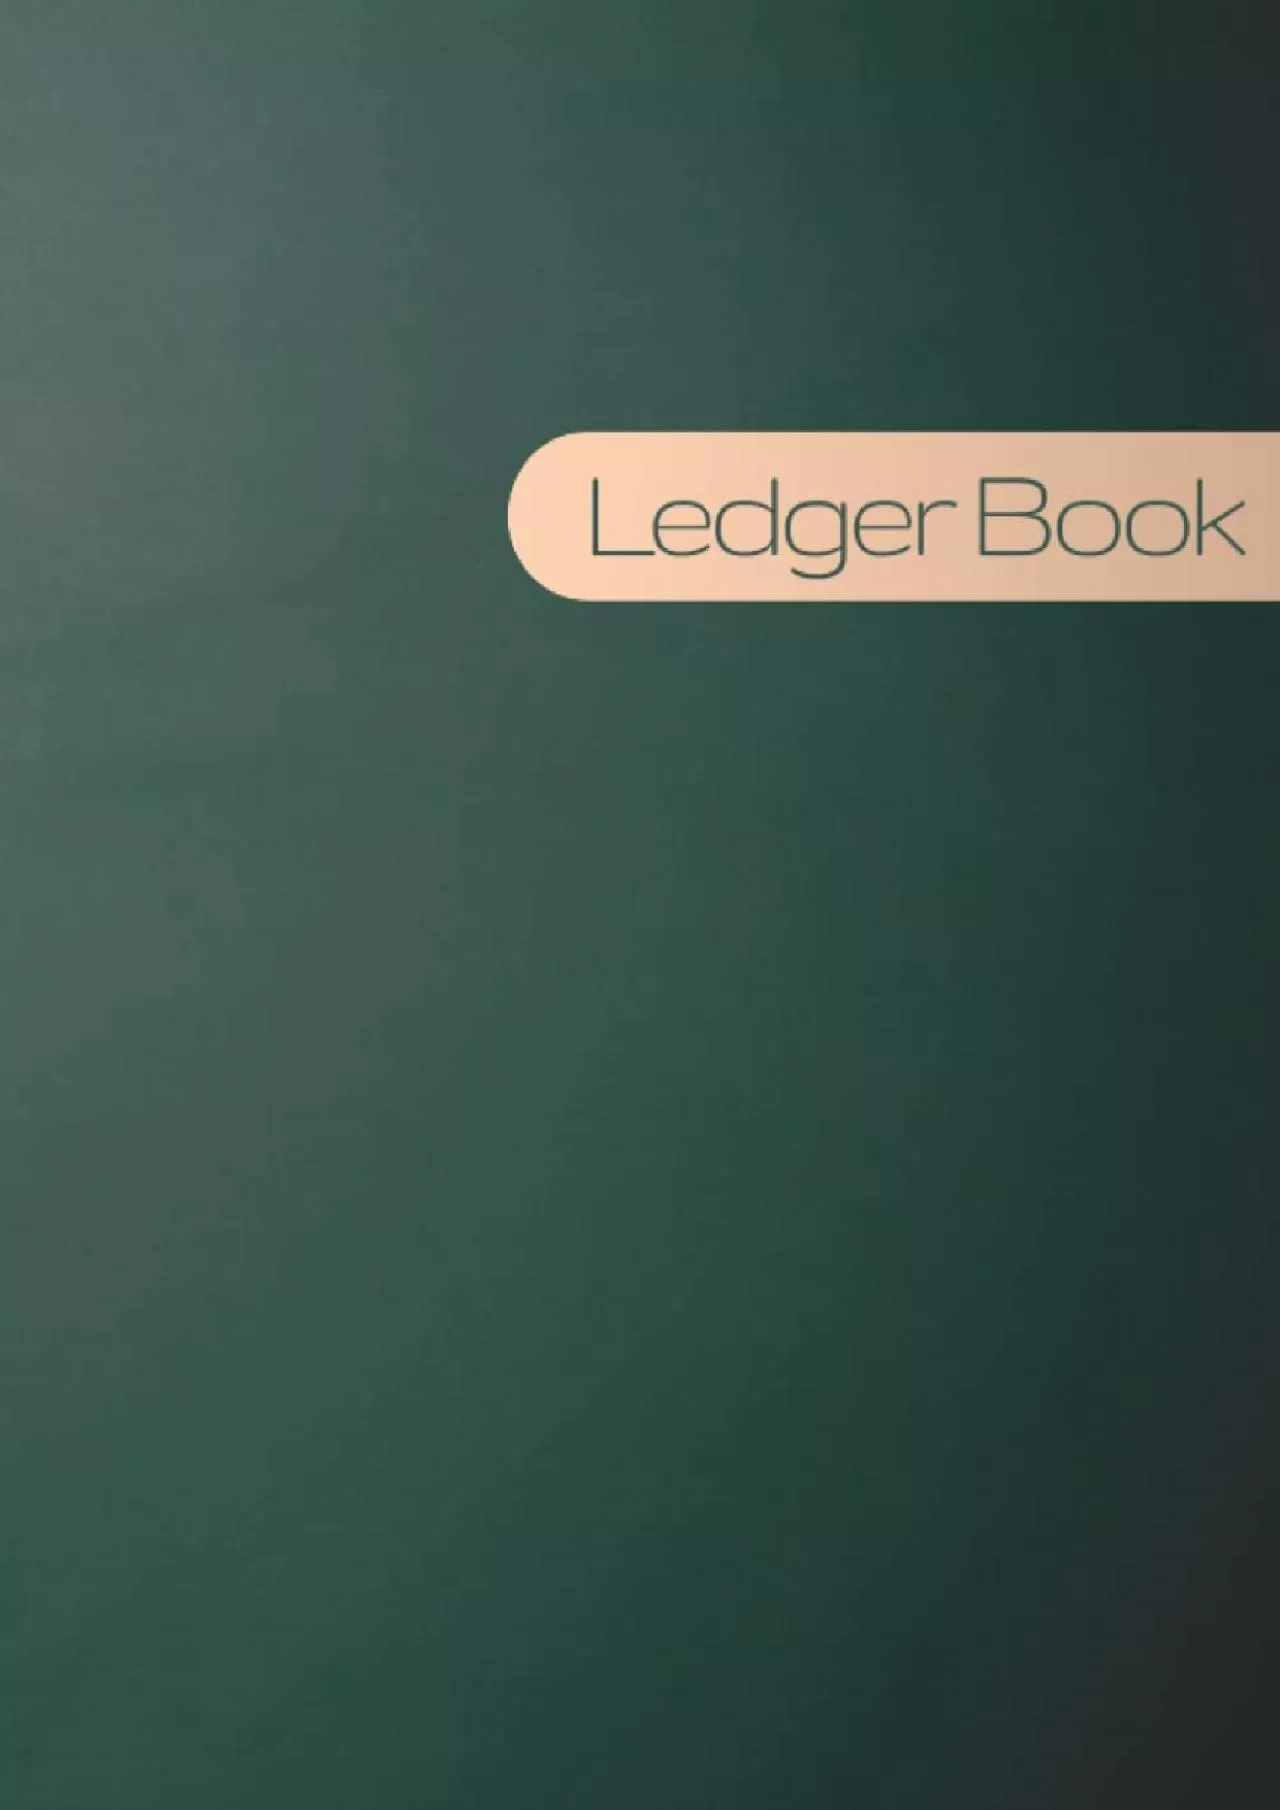 Ledger Book - Classic: Income & Expenses Log Book for Small Business Bookkeeping & Accounting